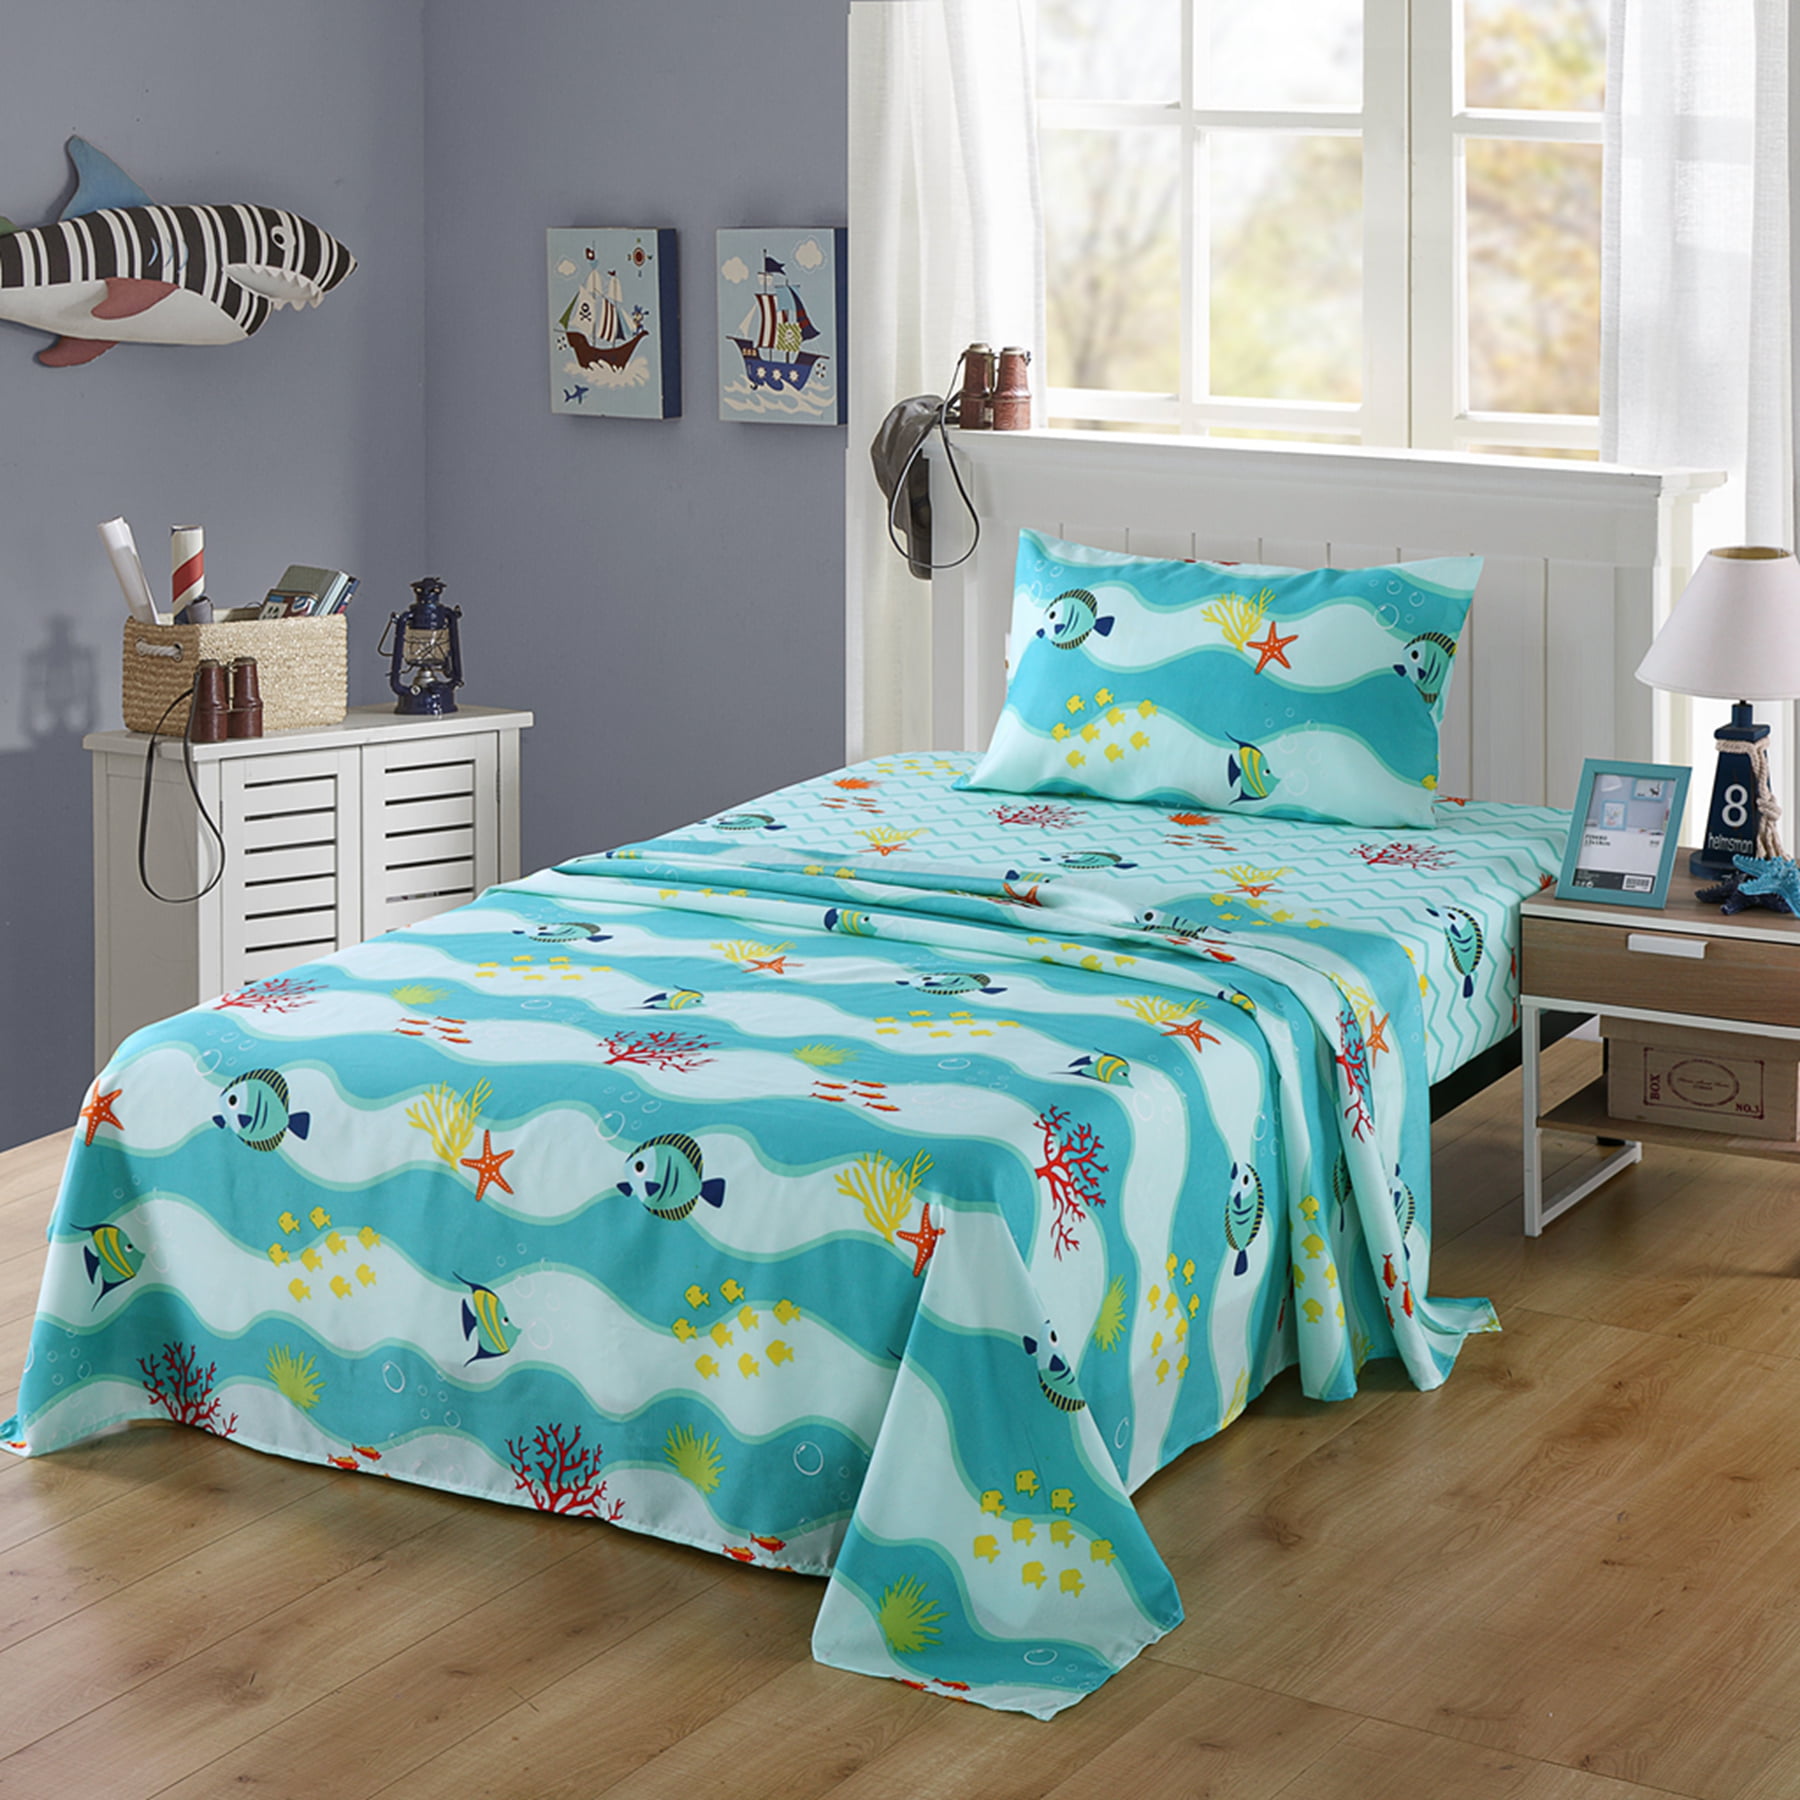 Kids Bedding Bunk Beds, Twin Size Bed Sheets